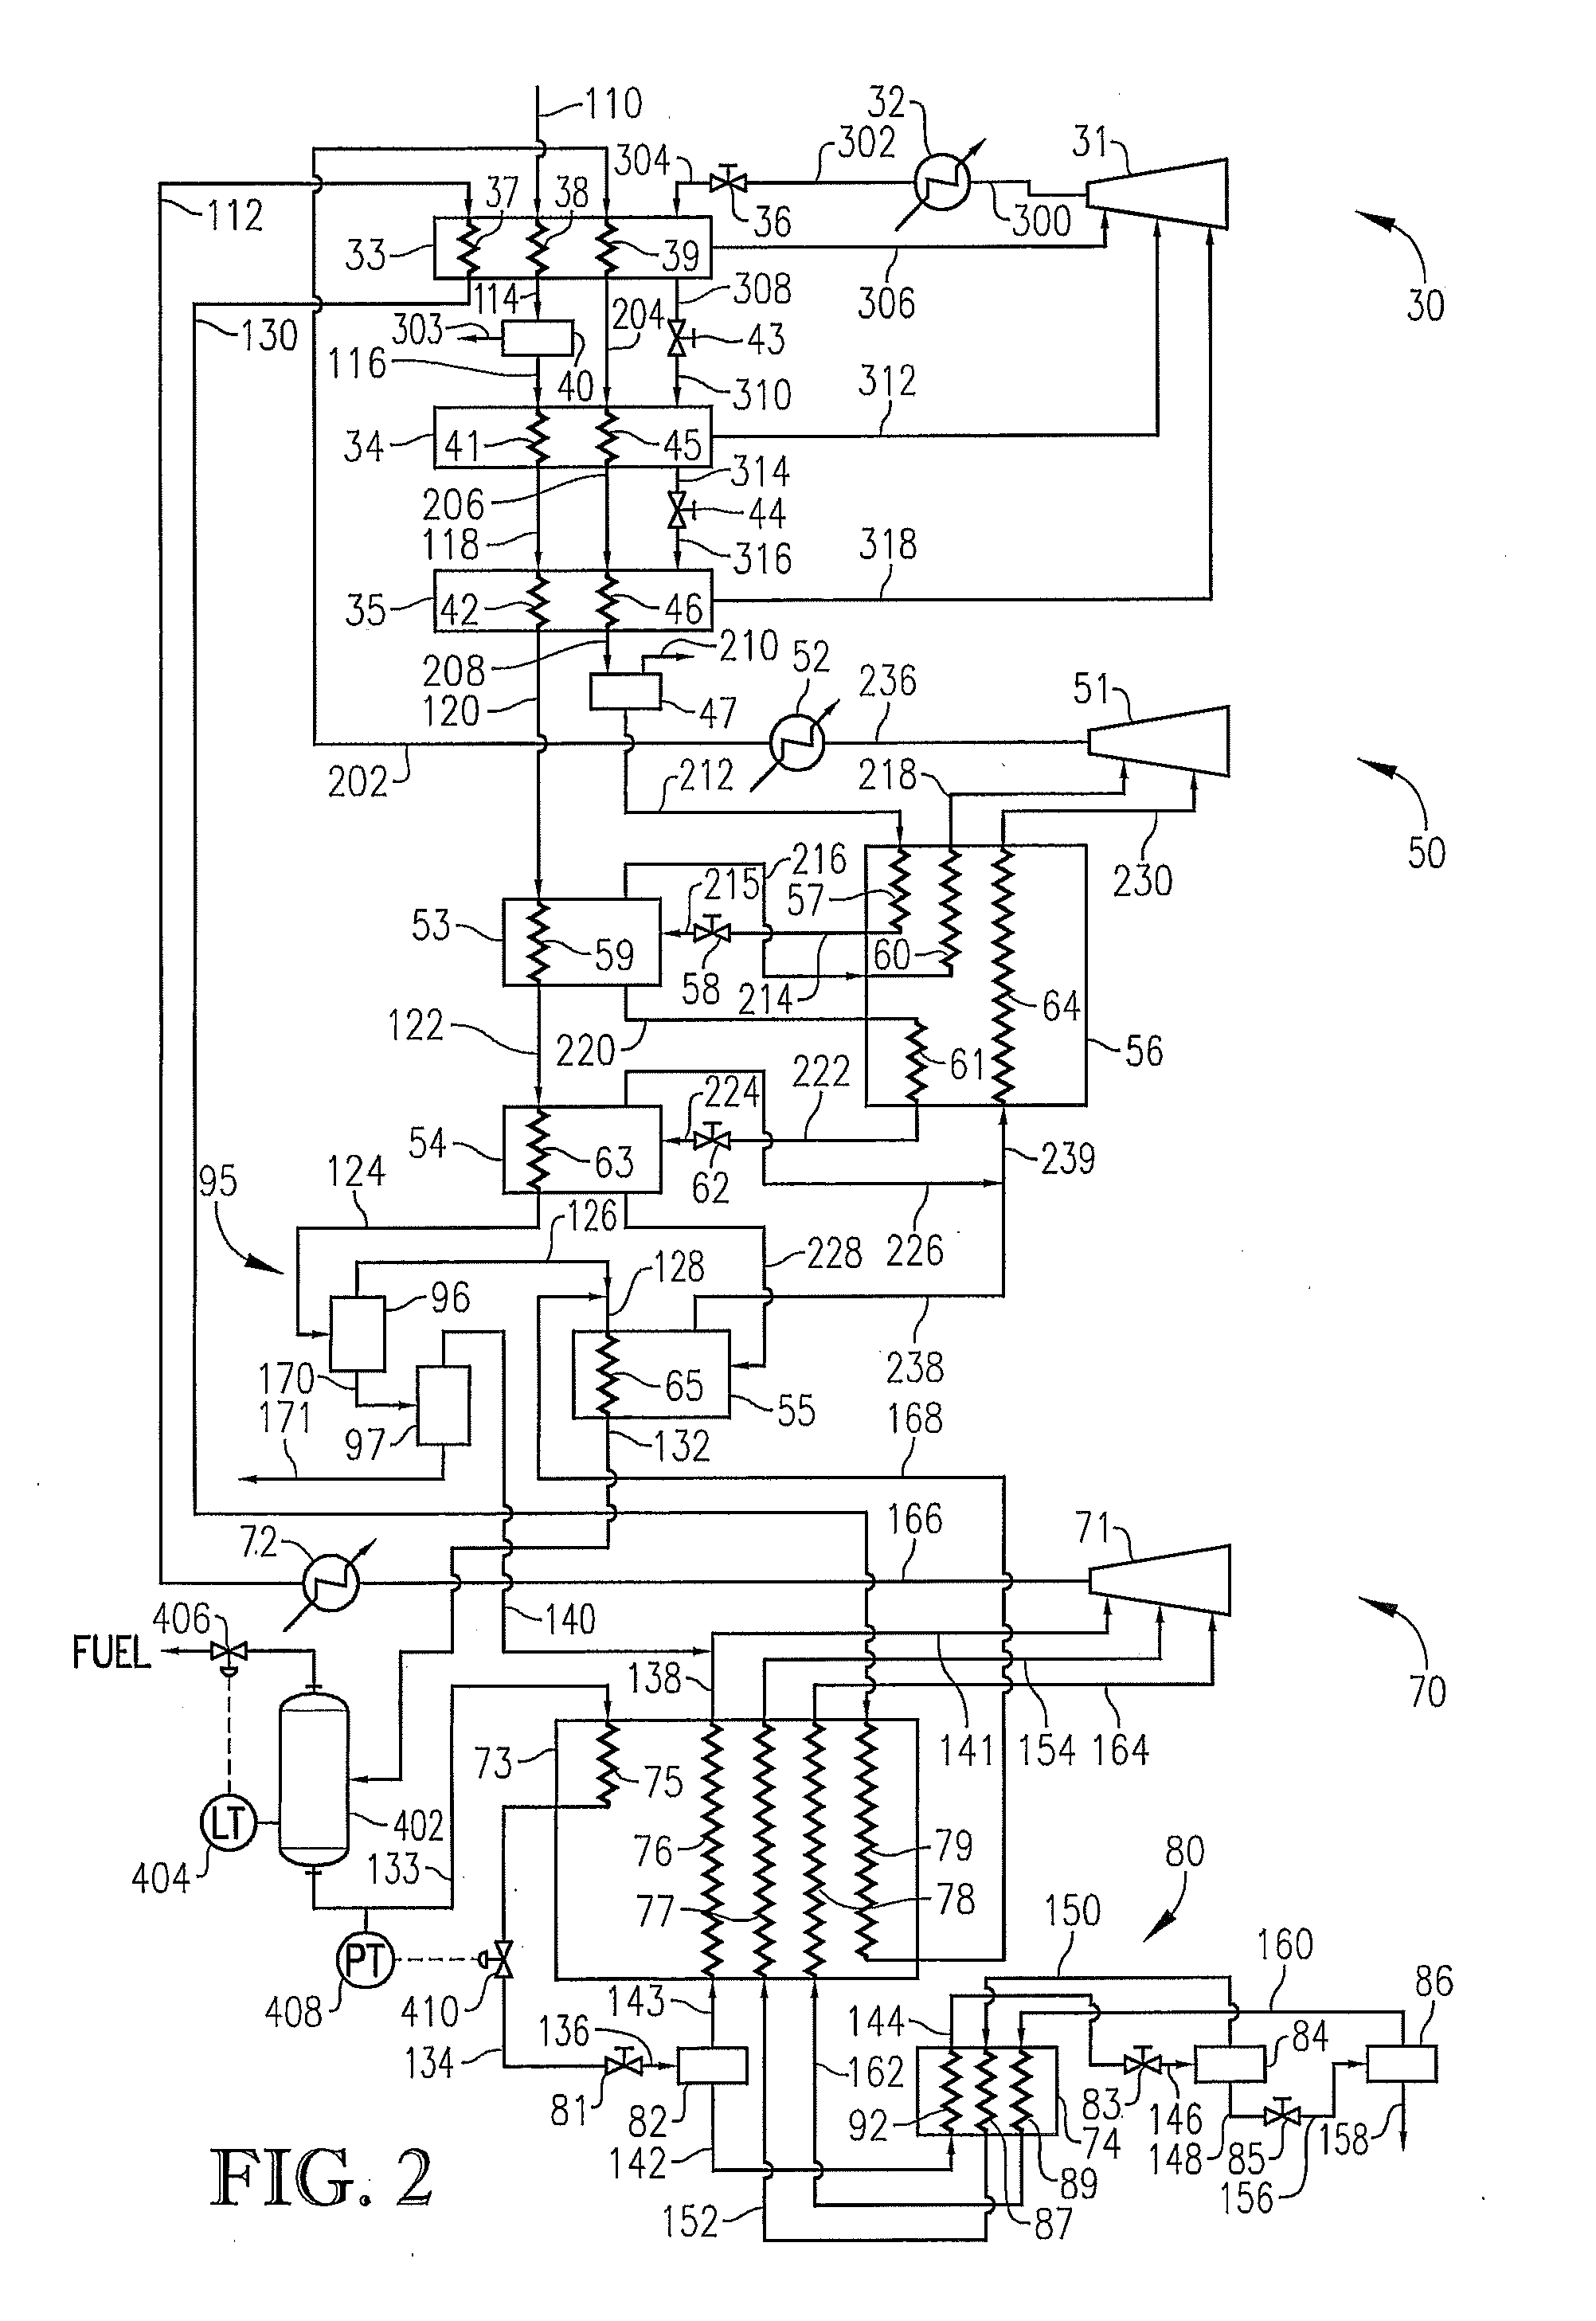 System for incondensable component separation in a liquefied natural gas facility